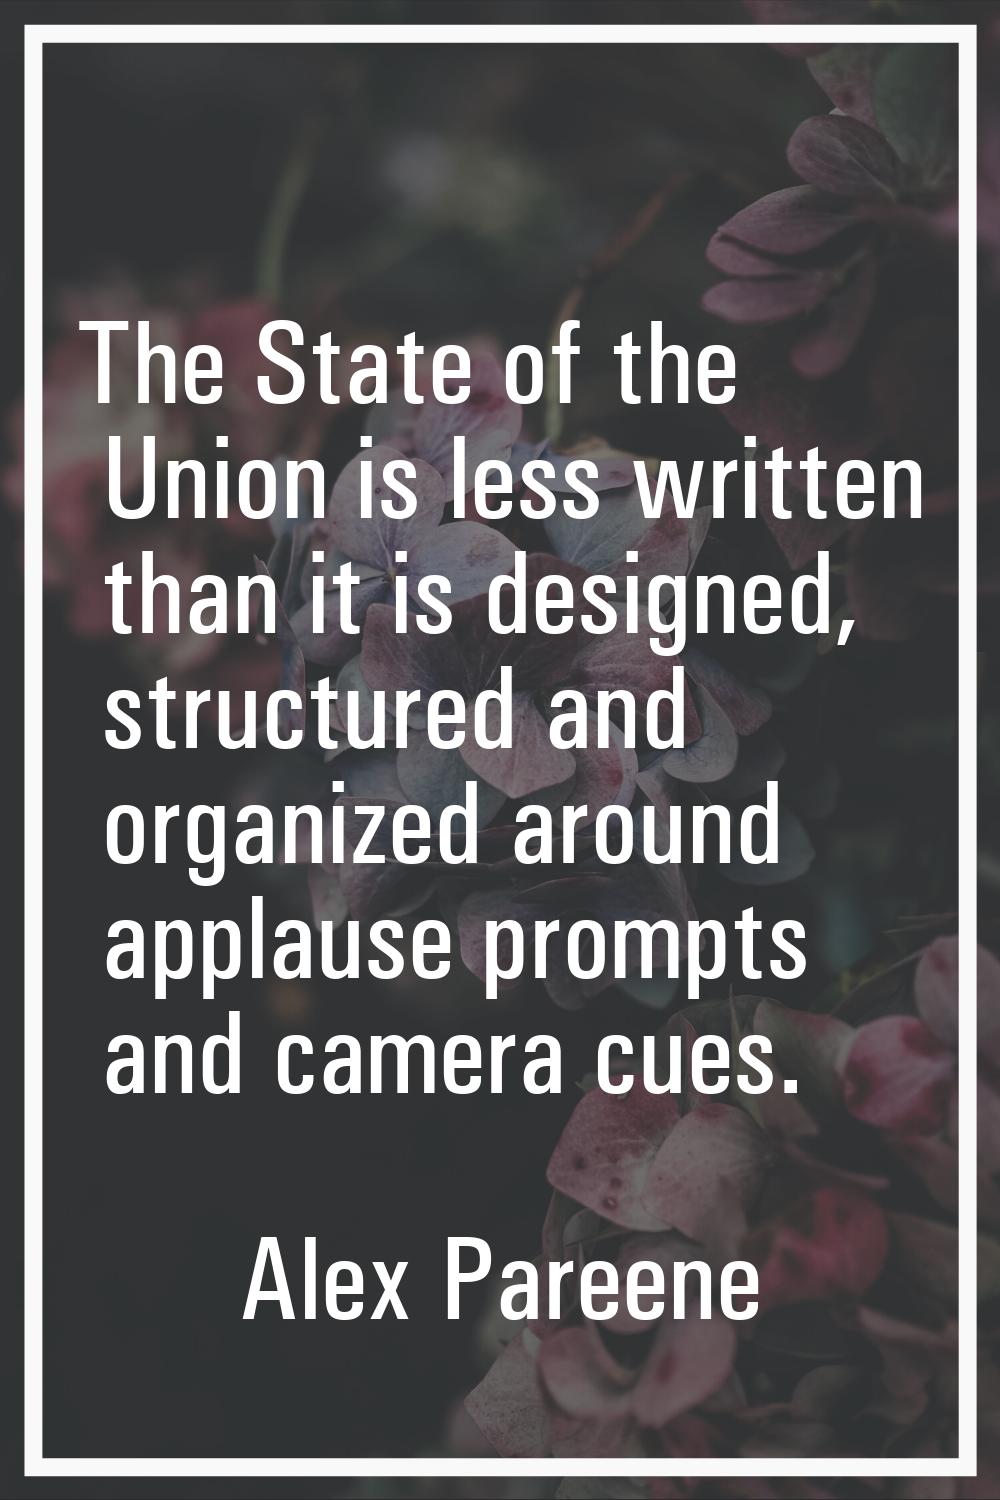 The State of the Union is less written than it is designed, structured and organized around applaus